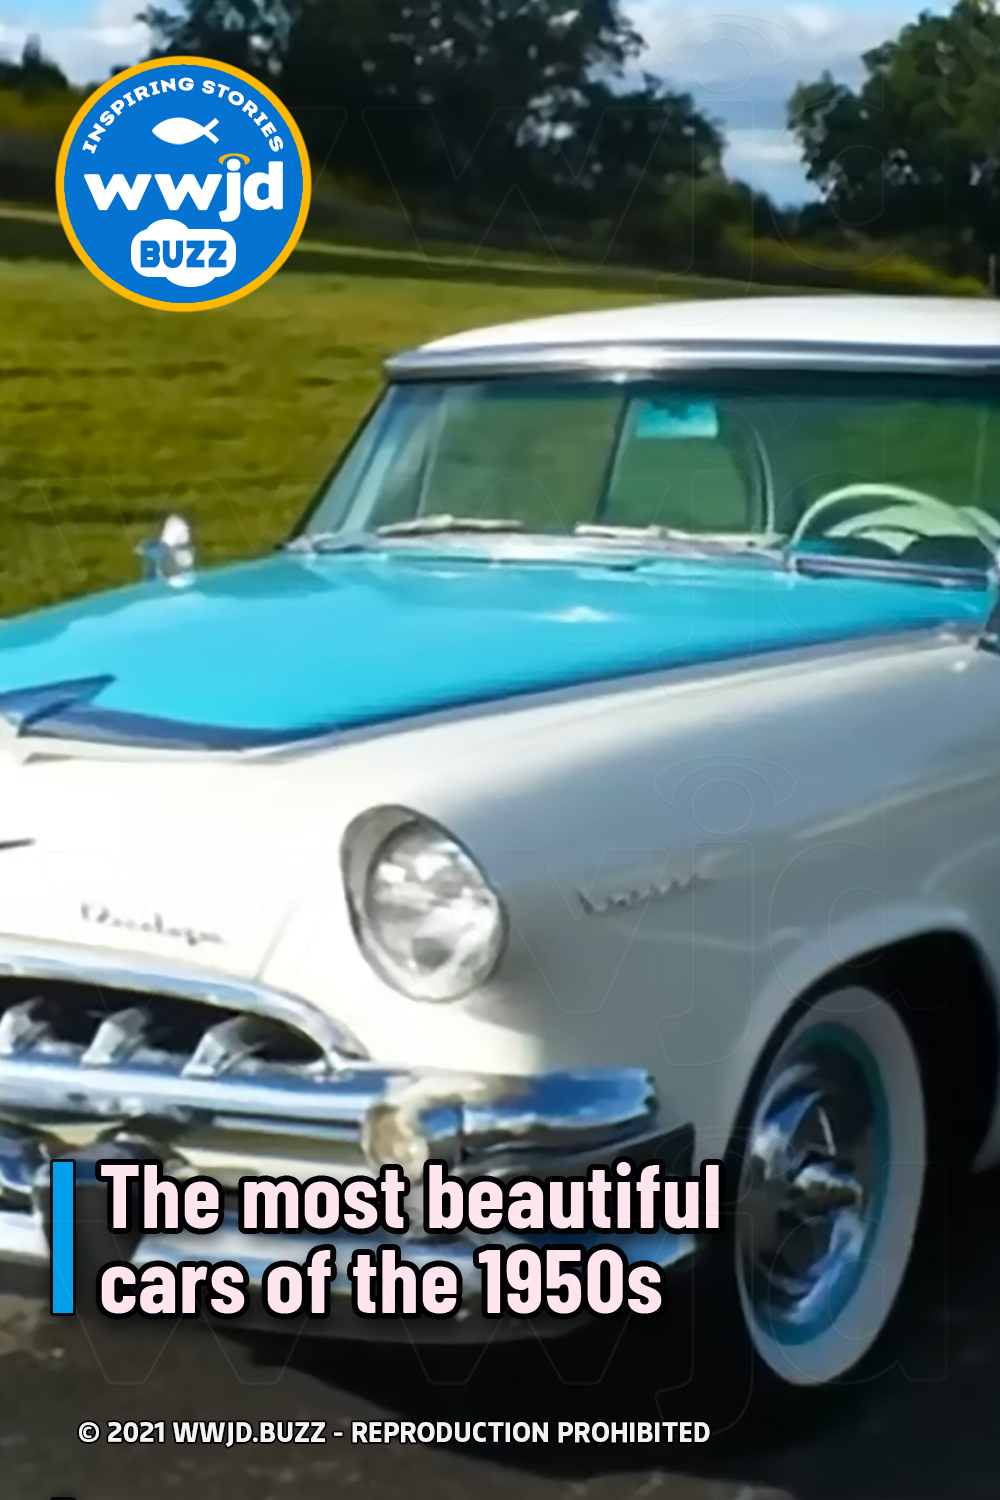 The most beautiful cars of the 1950s